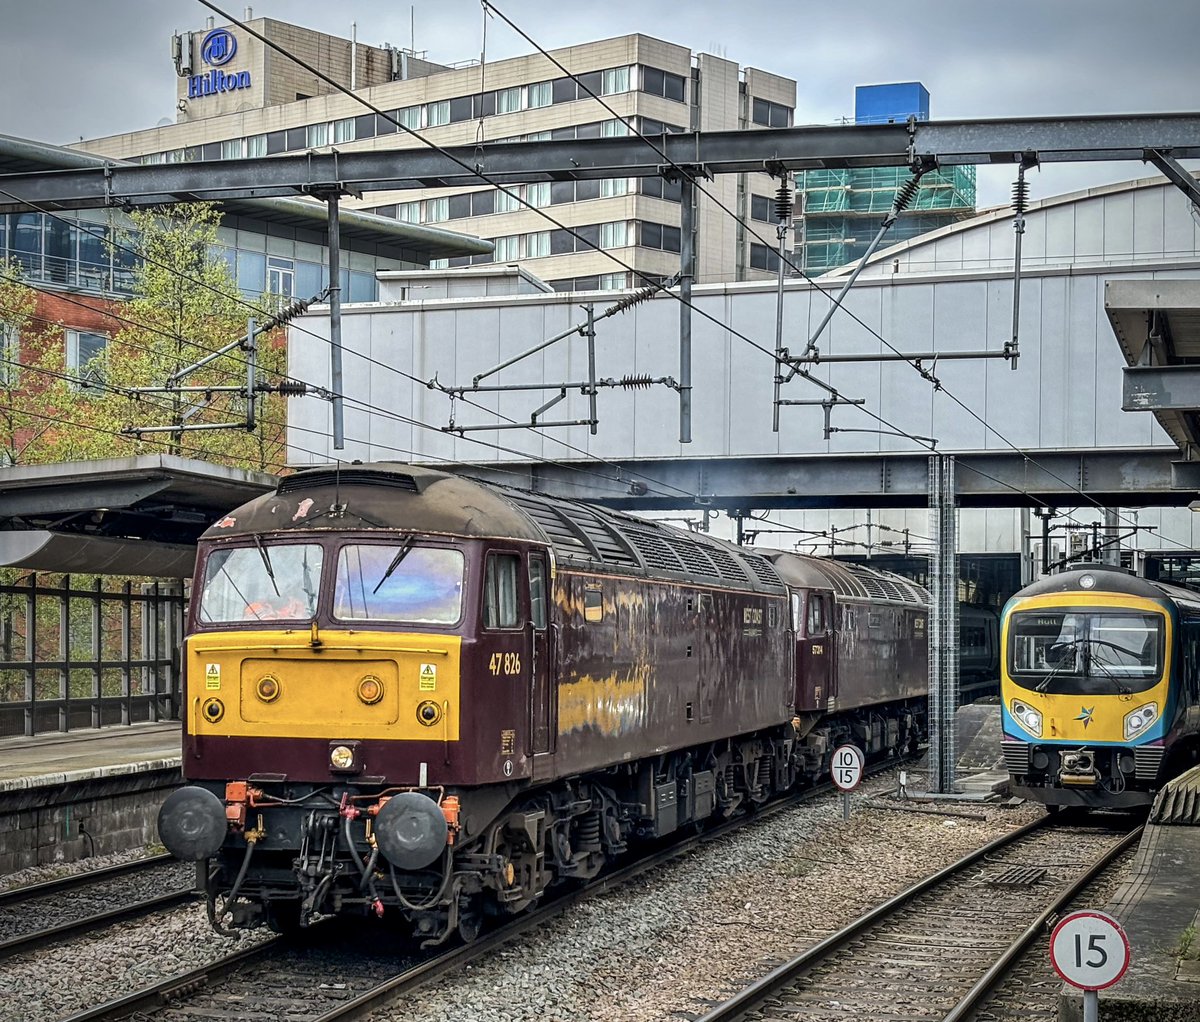 West Coast Railways 47826, and 57314 ‘Conwy Castle’ pass through platform 15 at Leeds with 0Z57, Newark Northgate to Neville Hill. (23/04/24) #WestCoastRailways #Class47 #Class57 #LeedsCityStation #Trainspotting